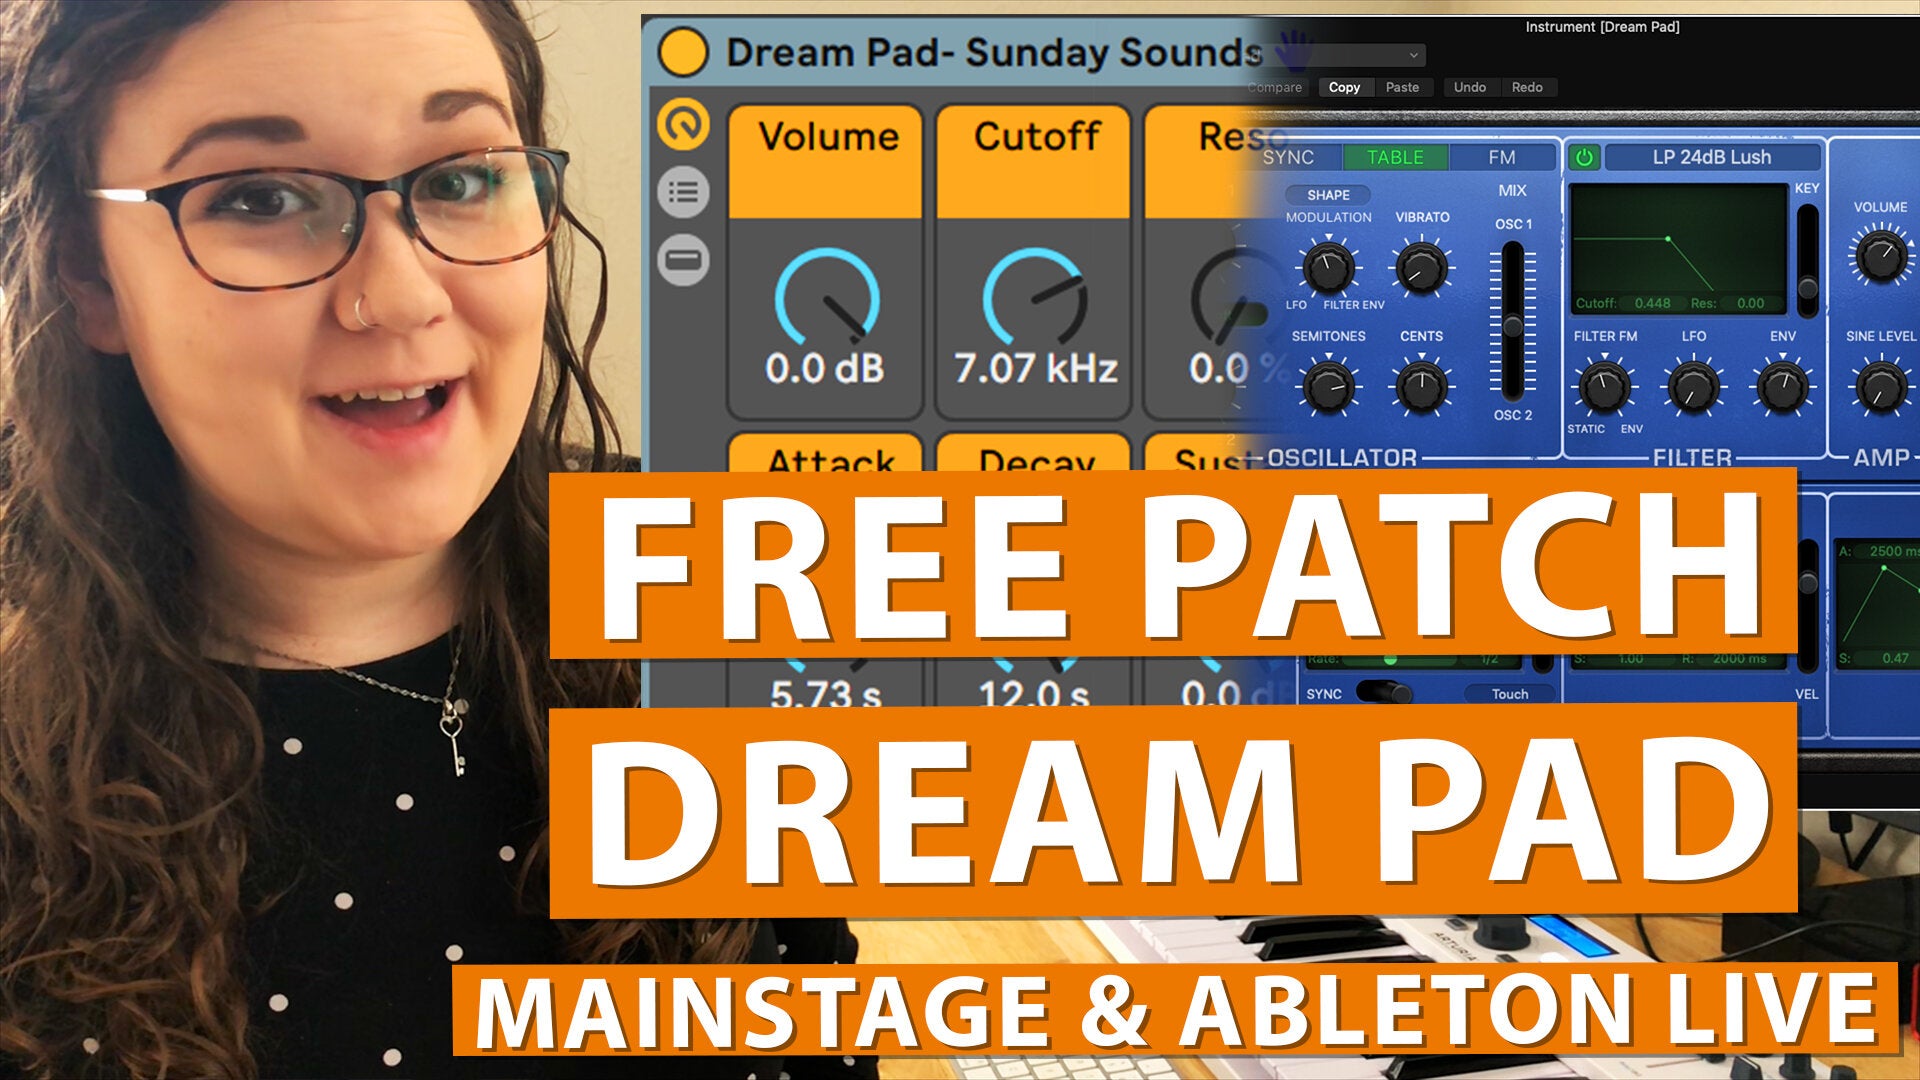 Free MainStage & Ableton Worship Patch! - Dream Pad